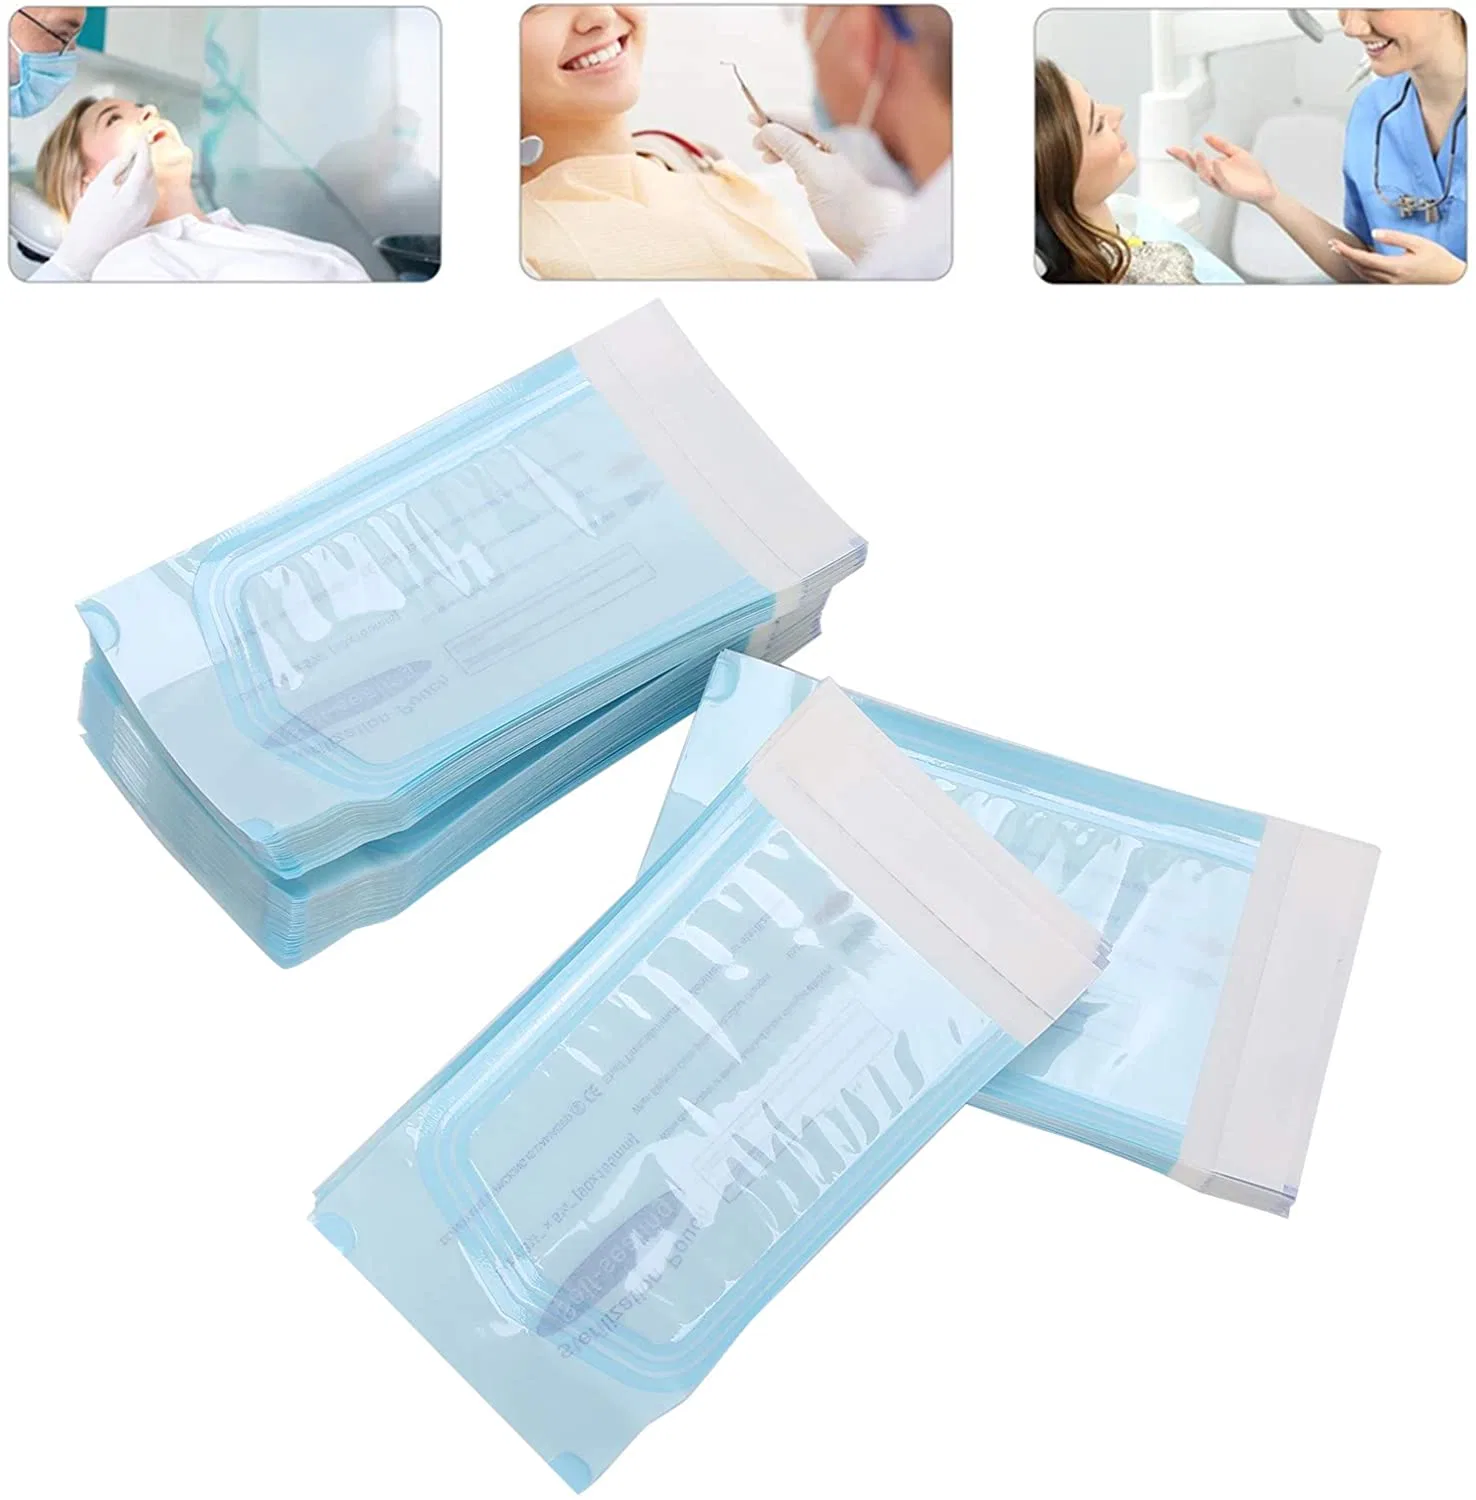 The Medical Use Disposable Self Stealing Sterilization Pouch Dental Supply Product